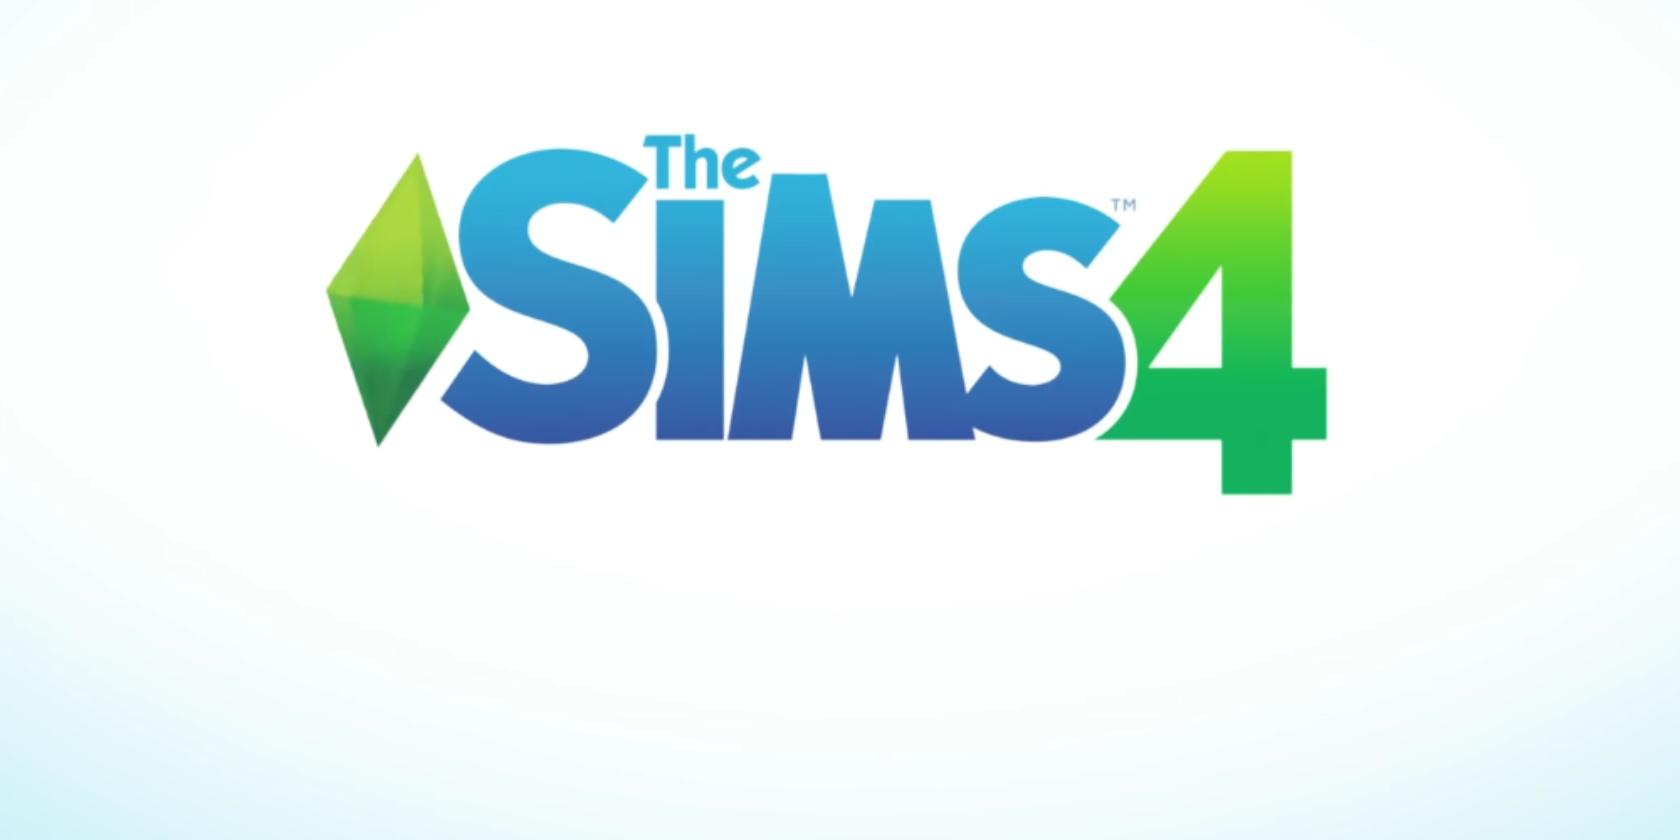 Sims 4 is now free to download on Windows and Mac